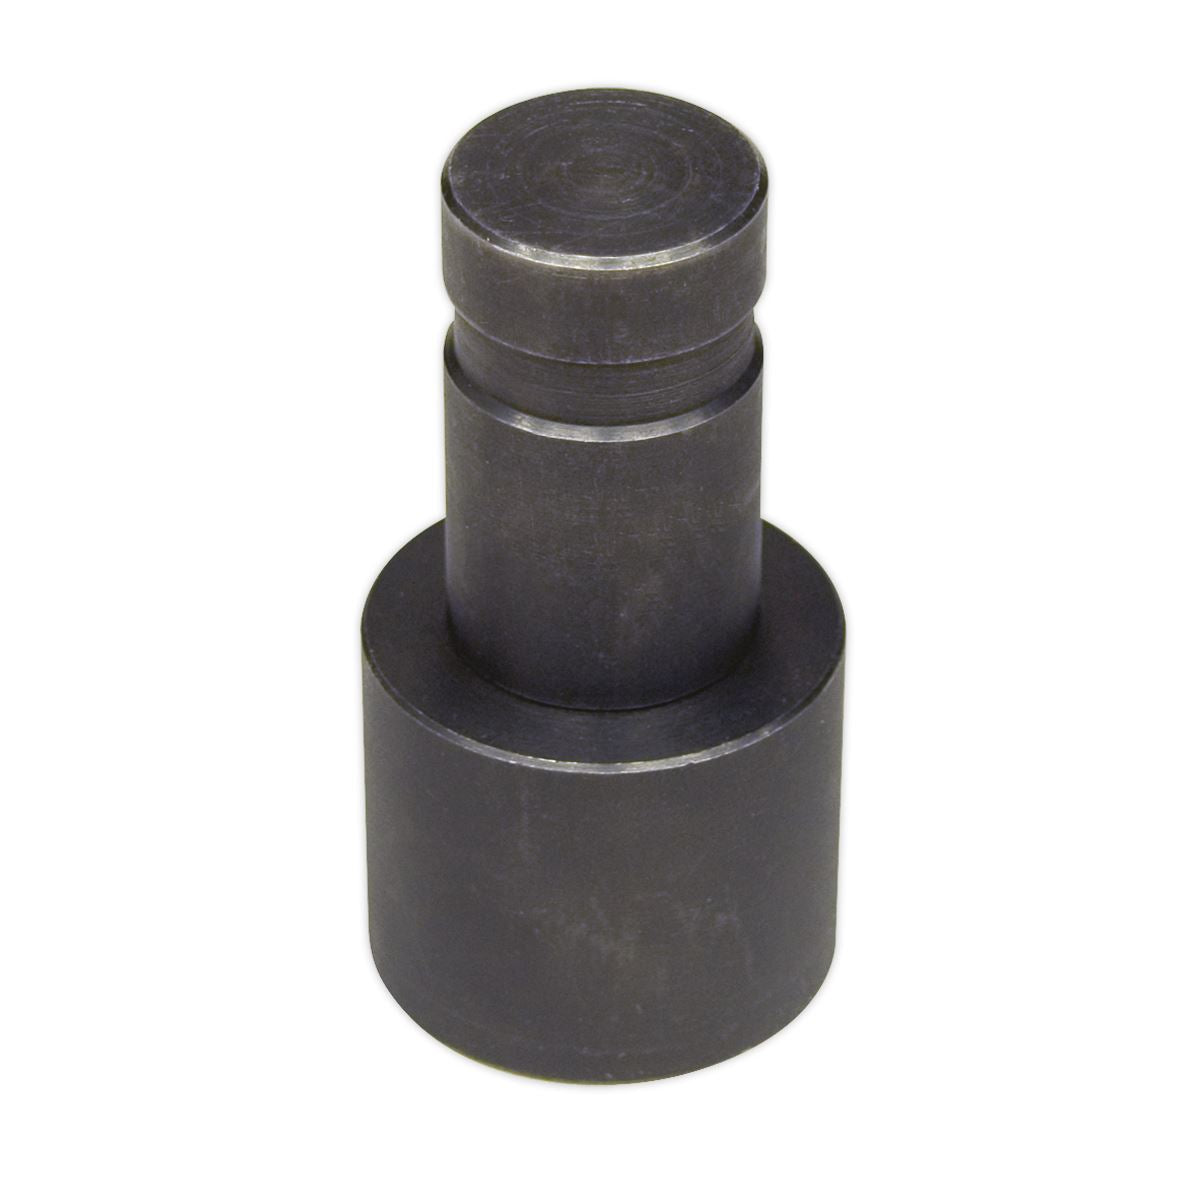 Sealey Adaptor for Oil Filter Crusher Ø50 x 115mm